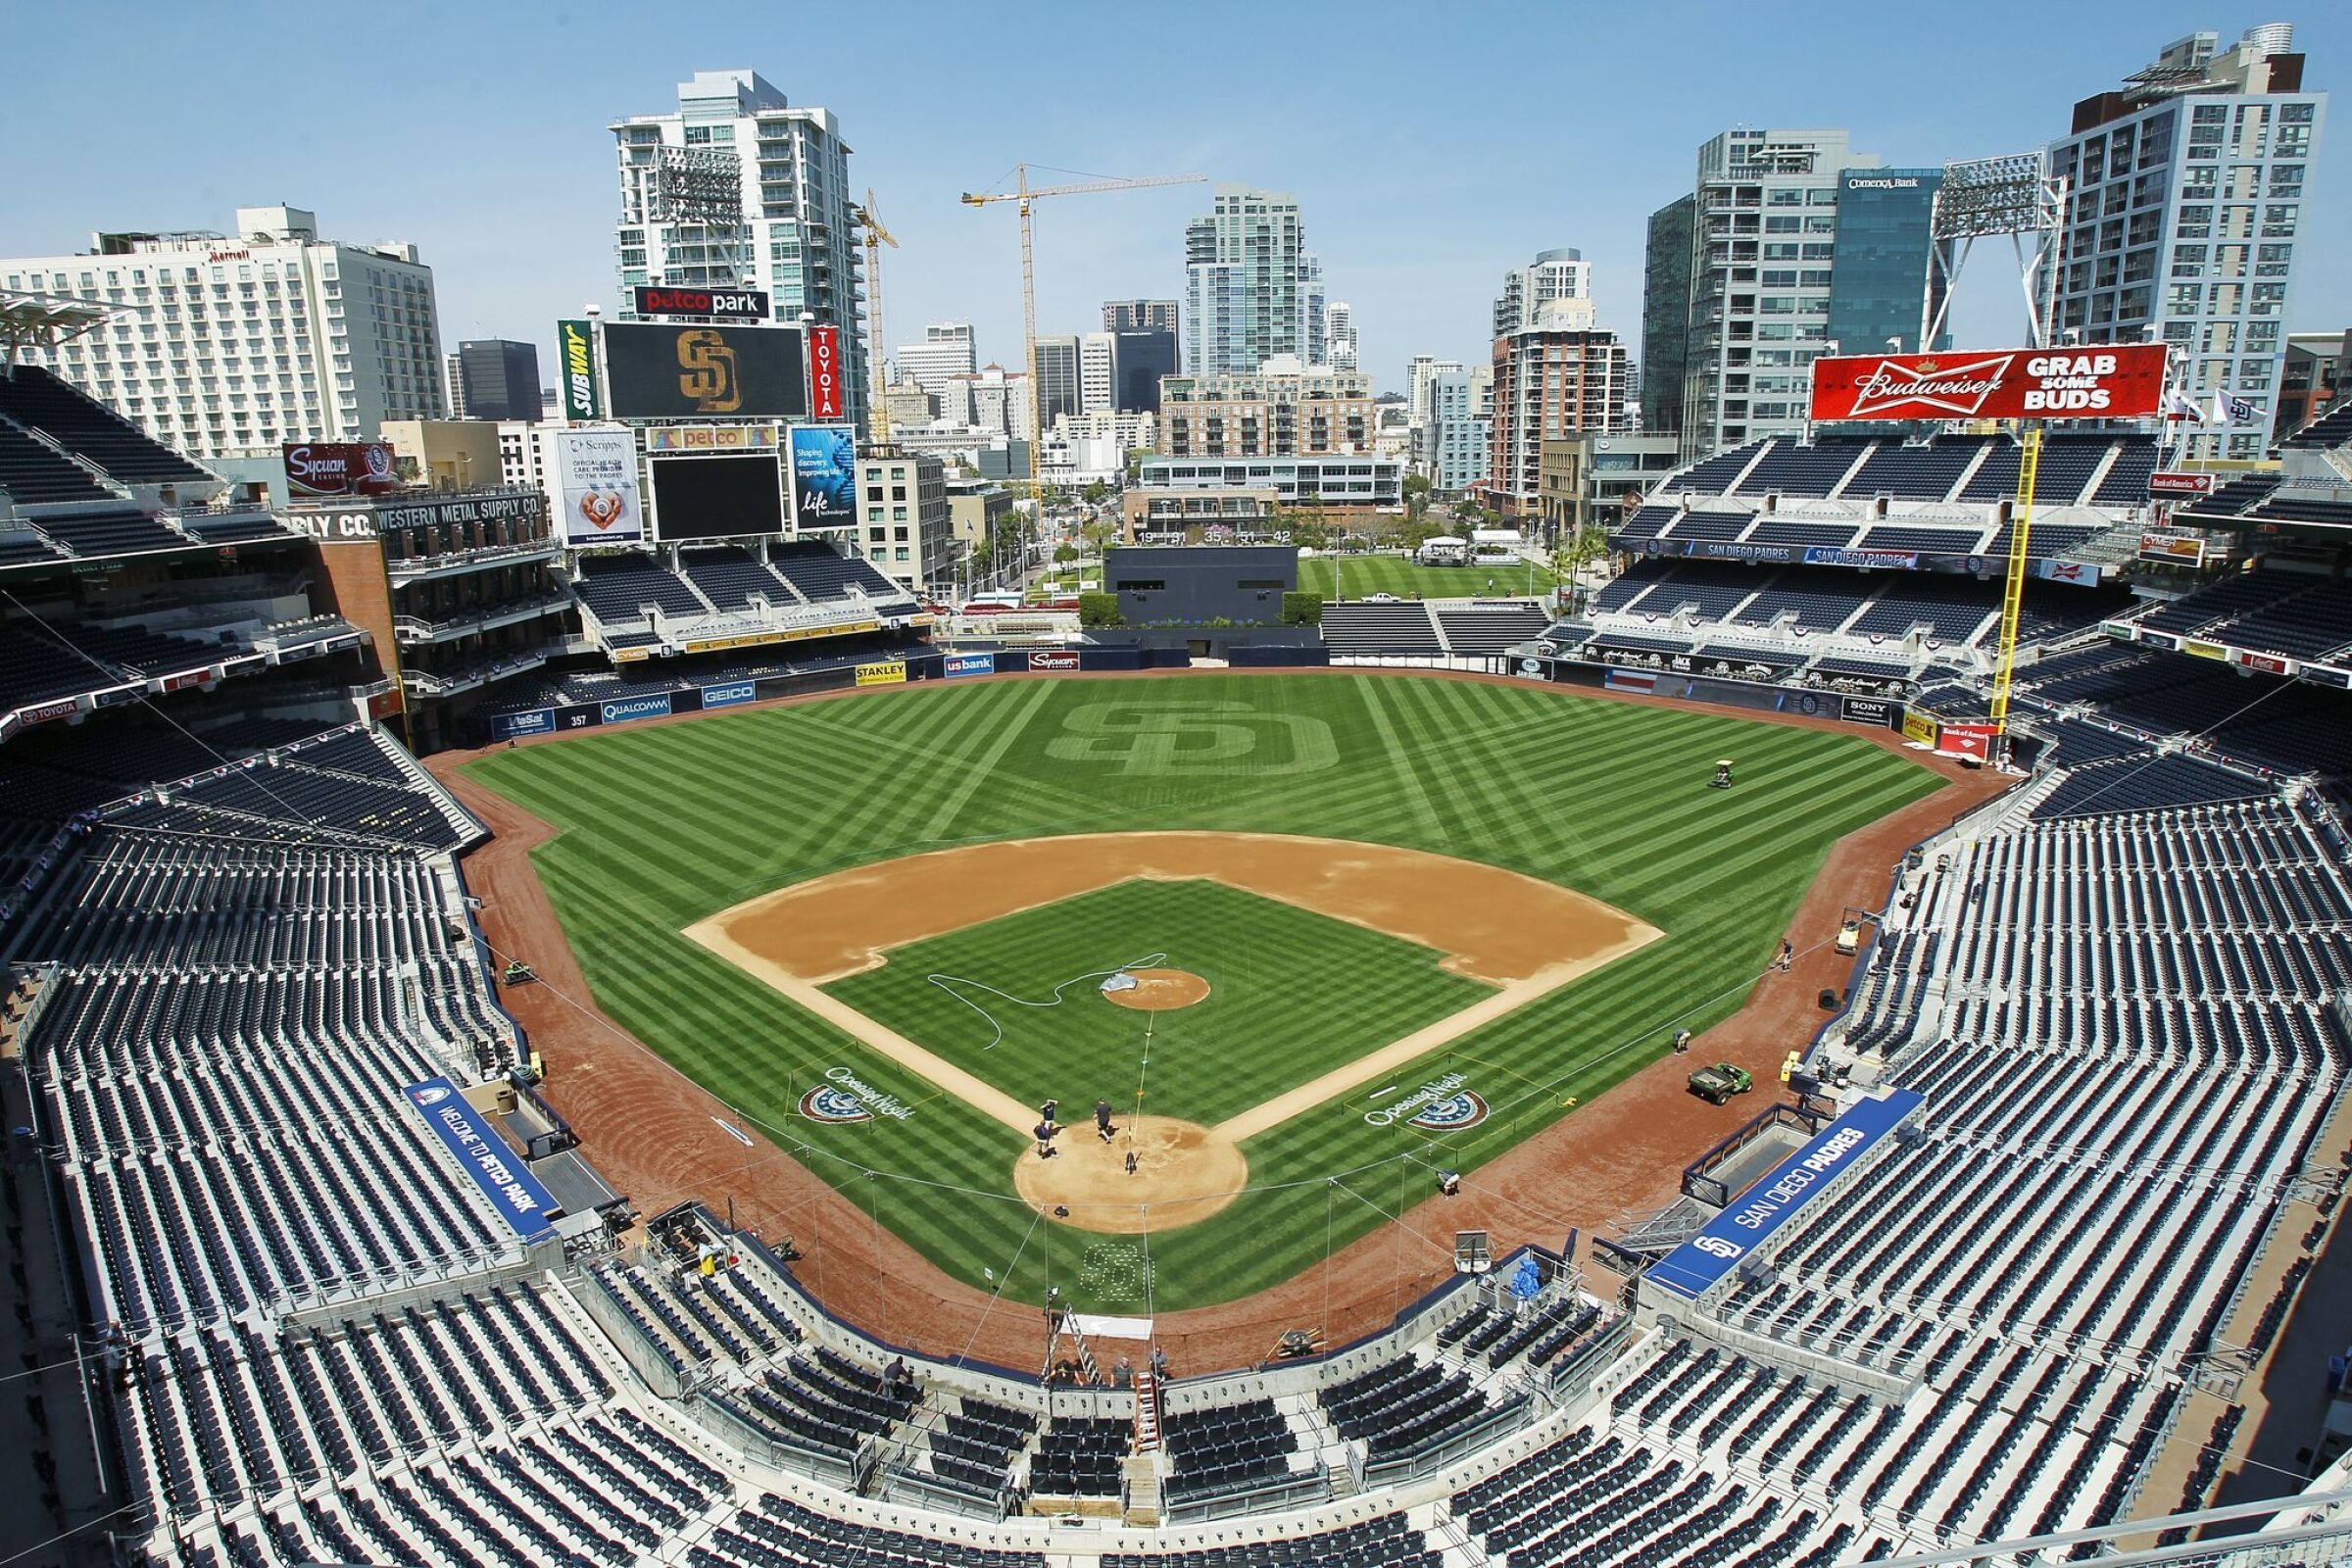 Petco Park was being prepared for the San Diego Padres opening week before coronavirus conditions forced the delay of Major League Baseball's 2020 season.